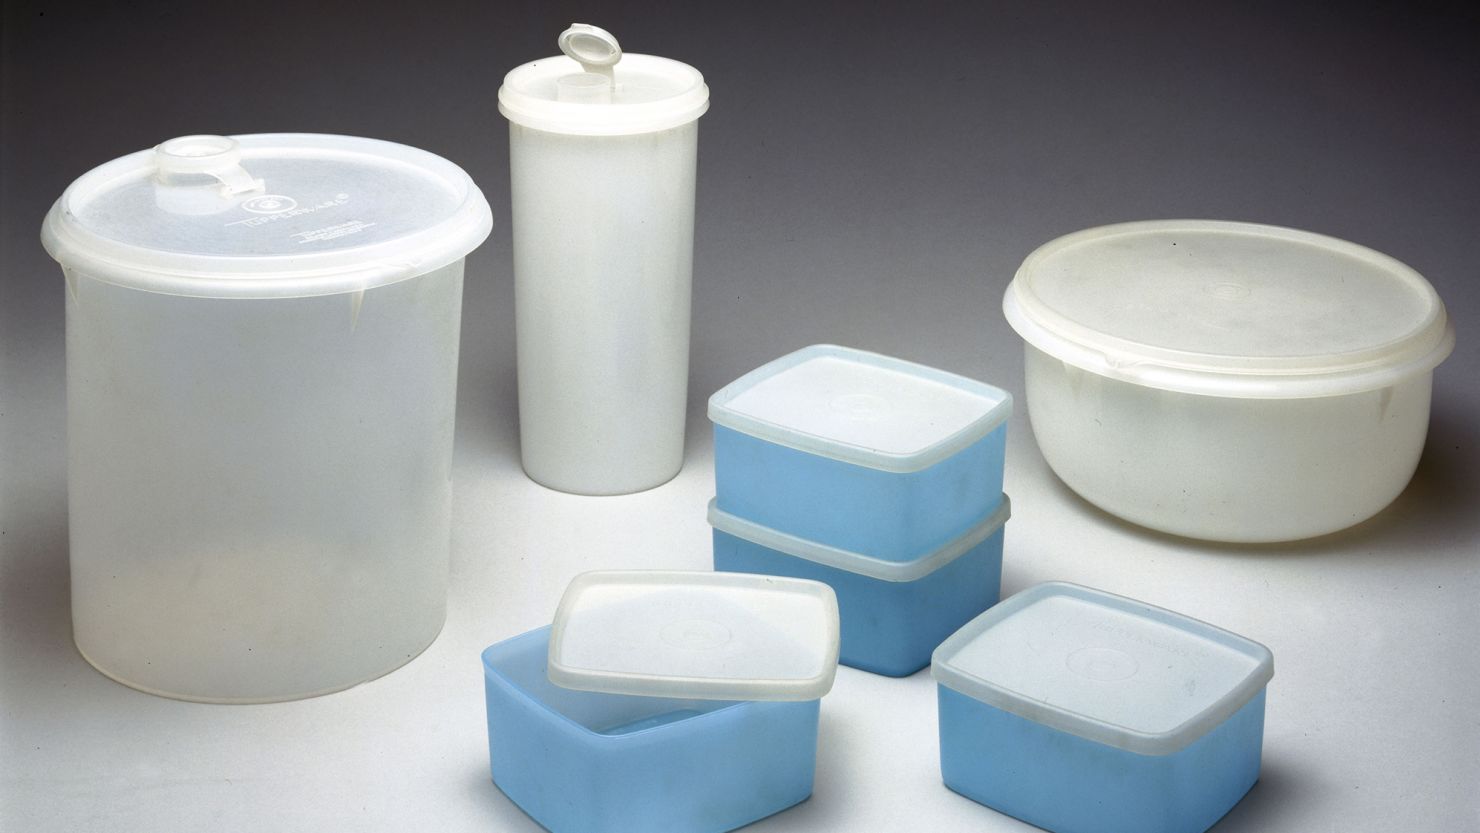 Known for its product design, Tupperware manufactured these 1980s products based on a 1960s line